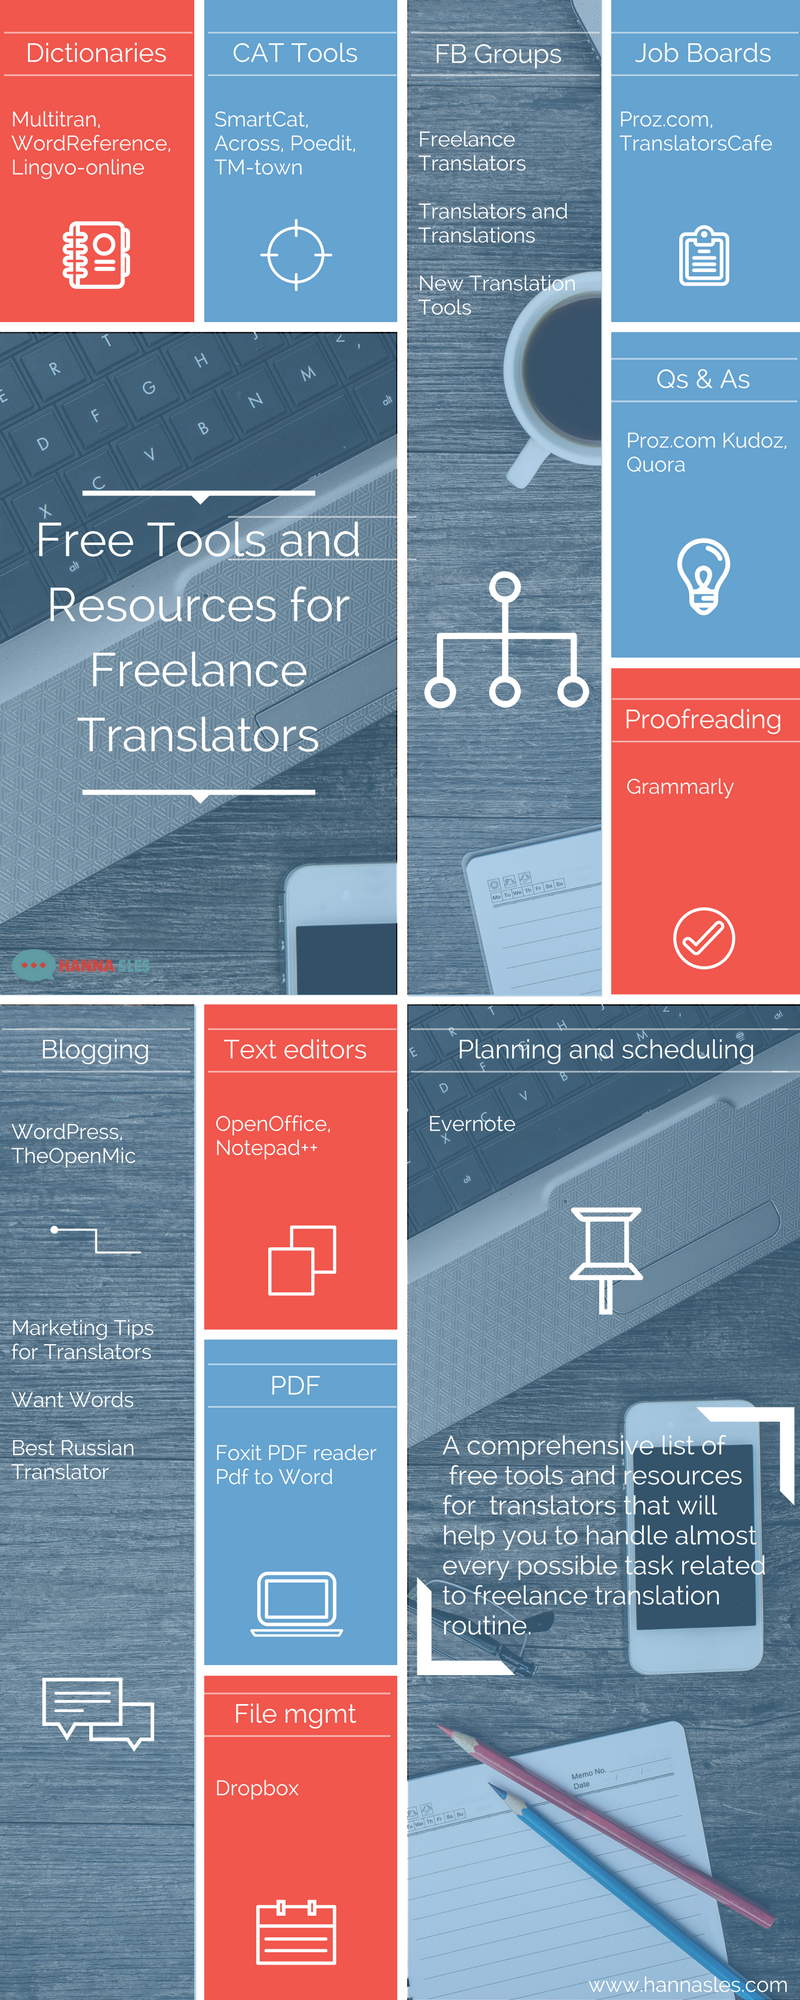 26-free-tools-and-resources-for-freelance-translators-1